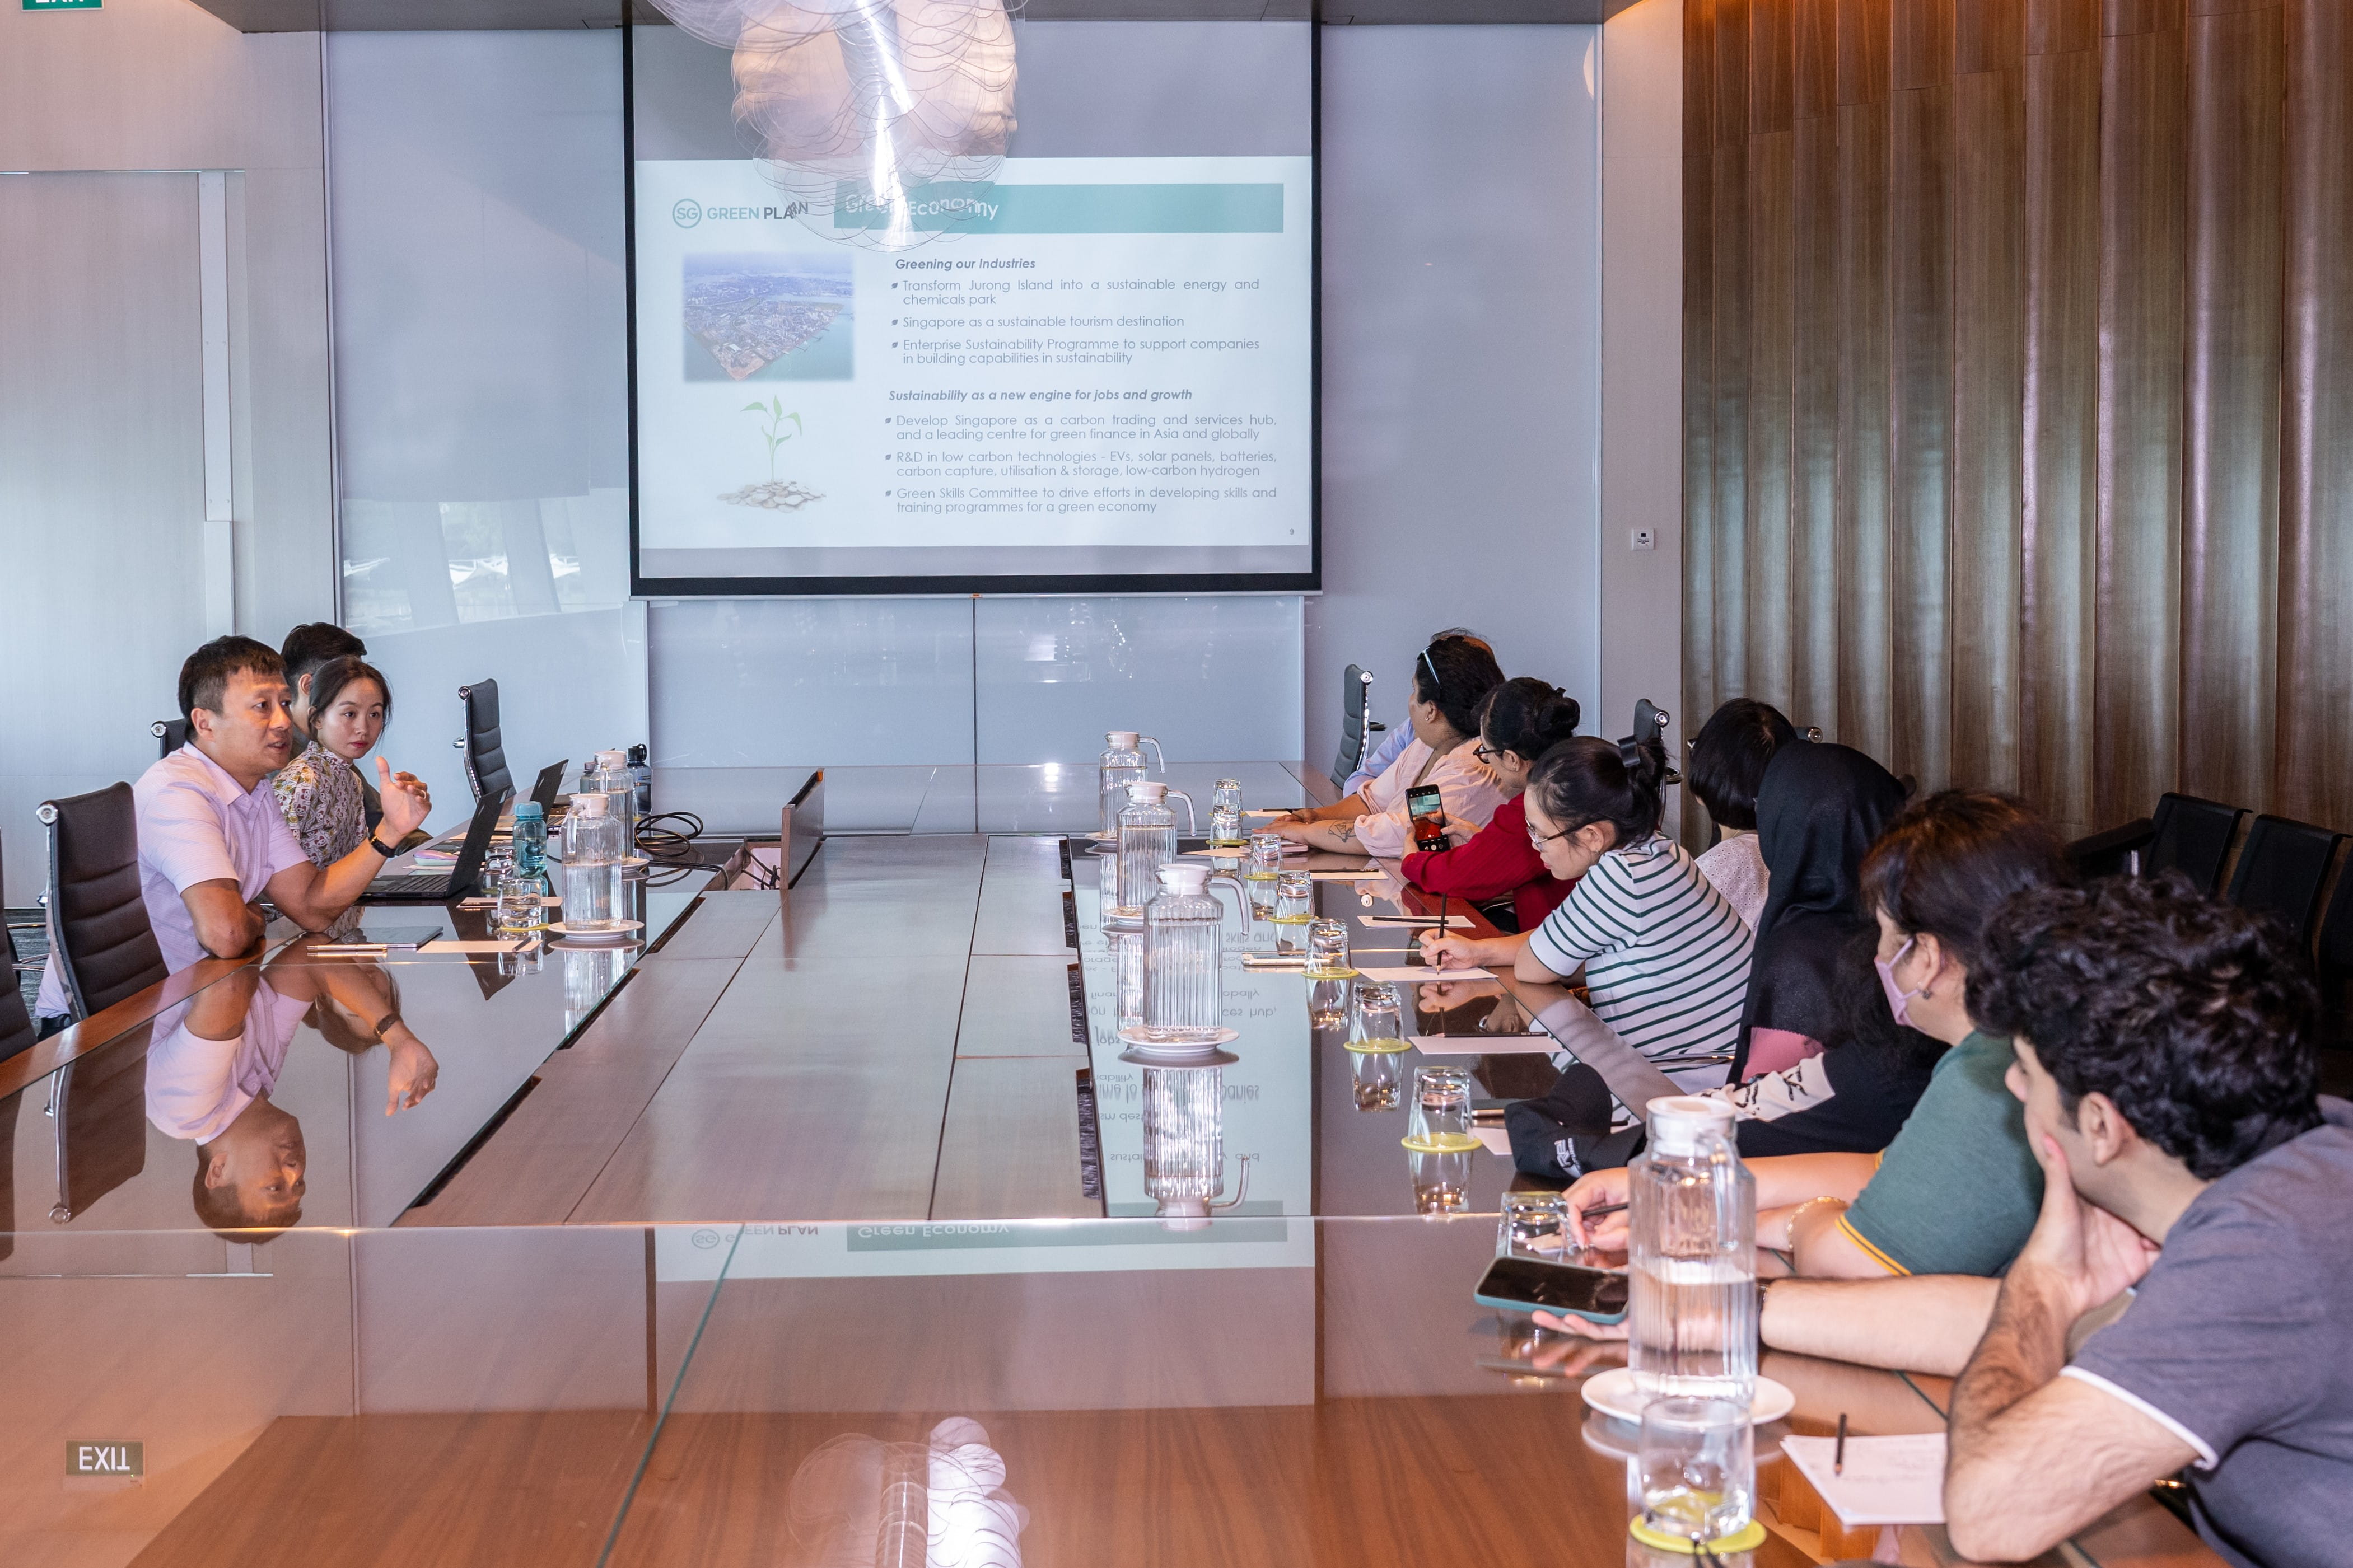 JVP participants at a briefing on the Singapore Green Plan by Mr Tze Chin Ong, Deputy Secretary (Resilience), Ministry of Sustainability and Environment.